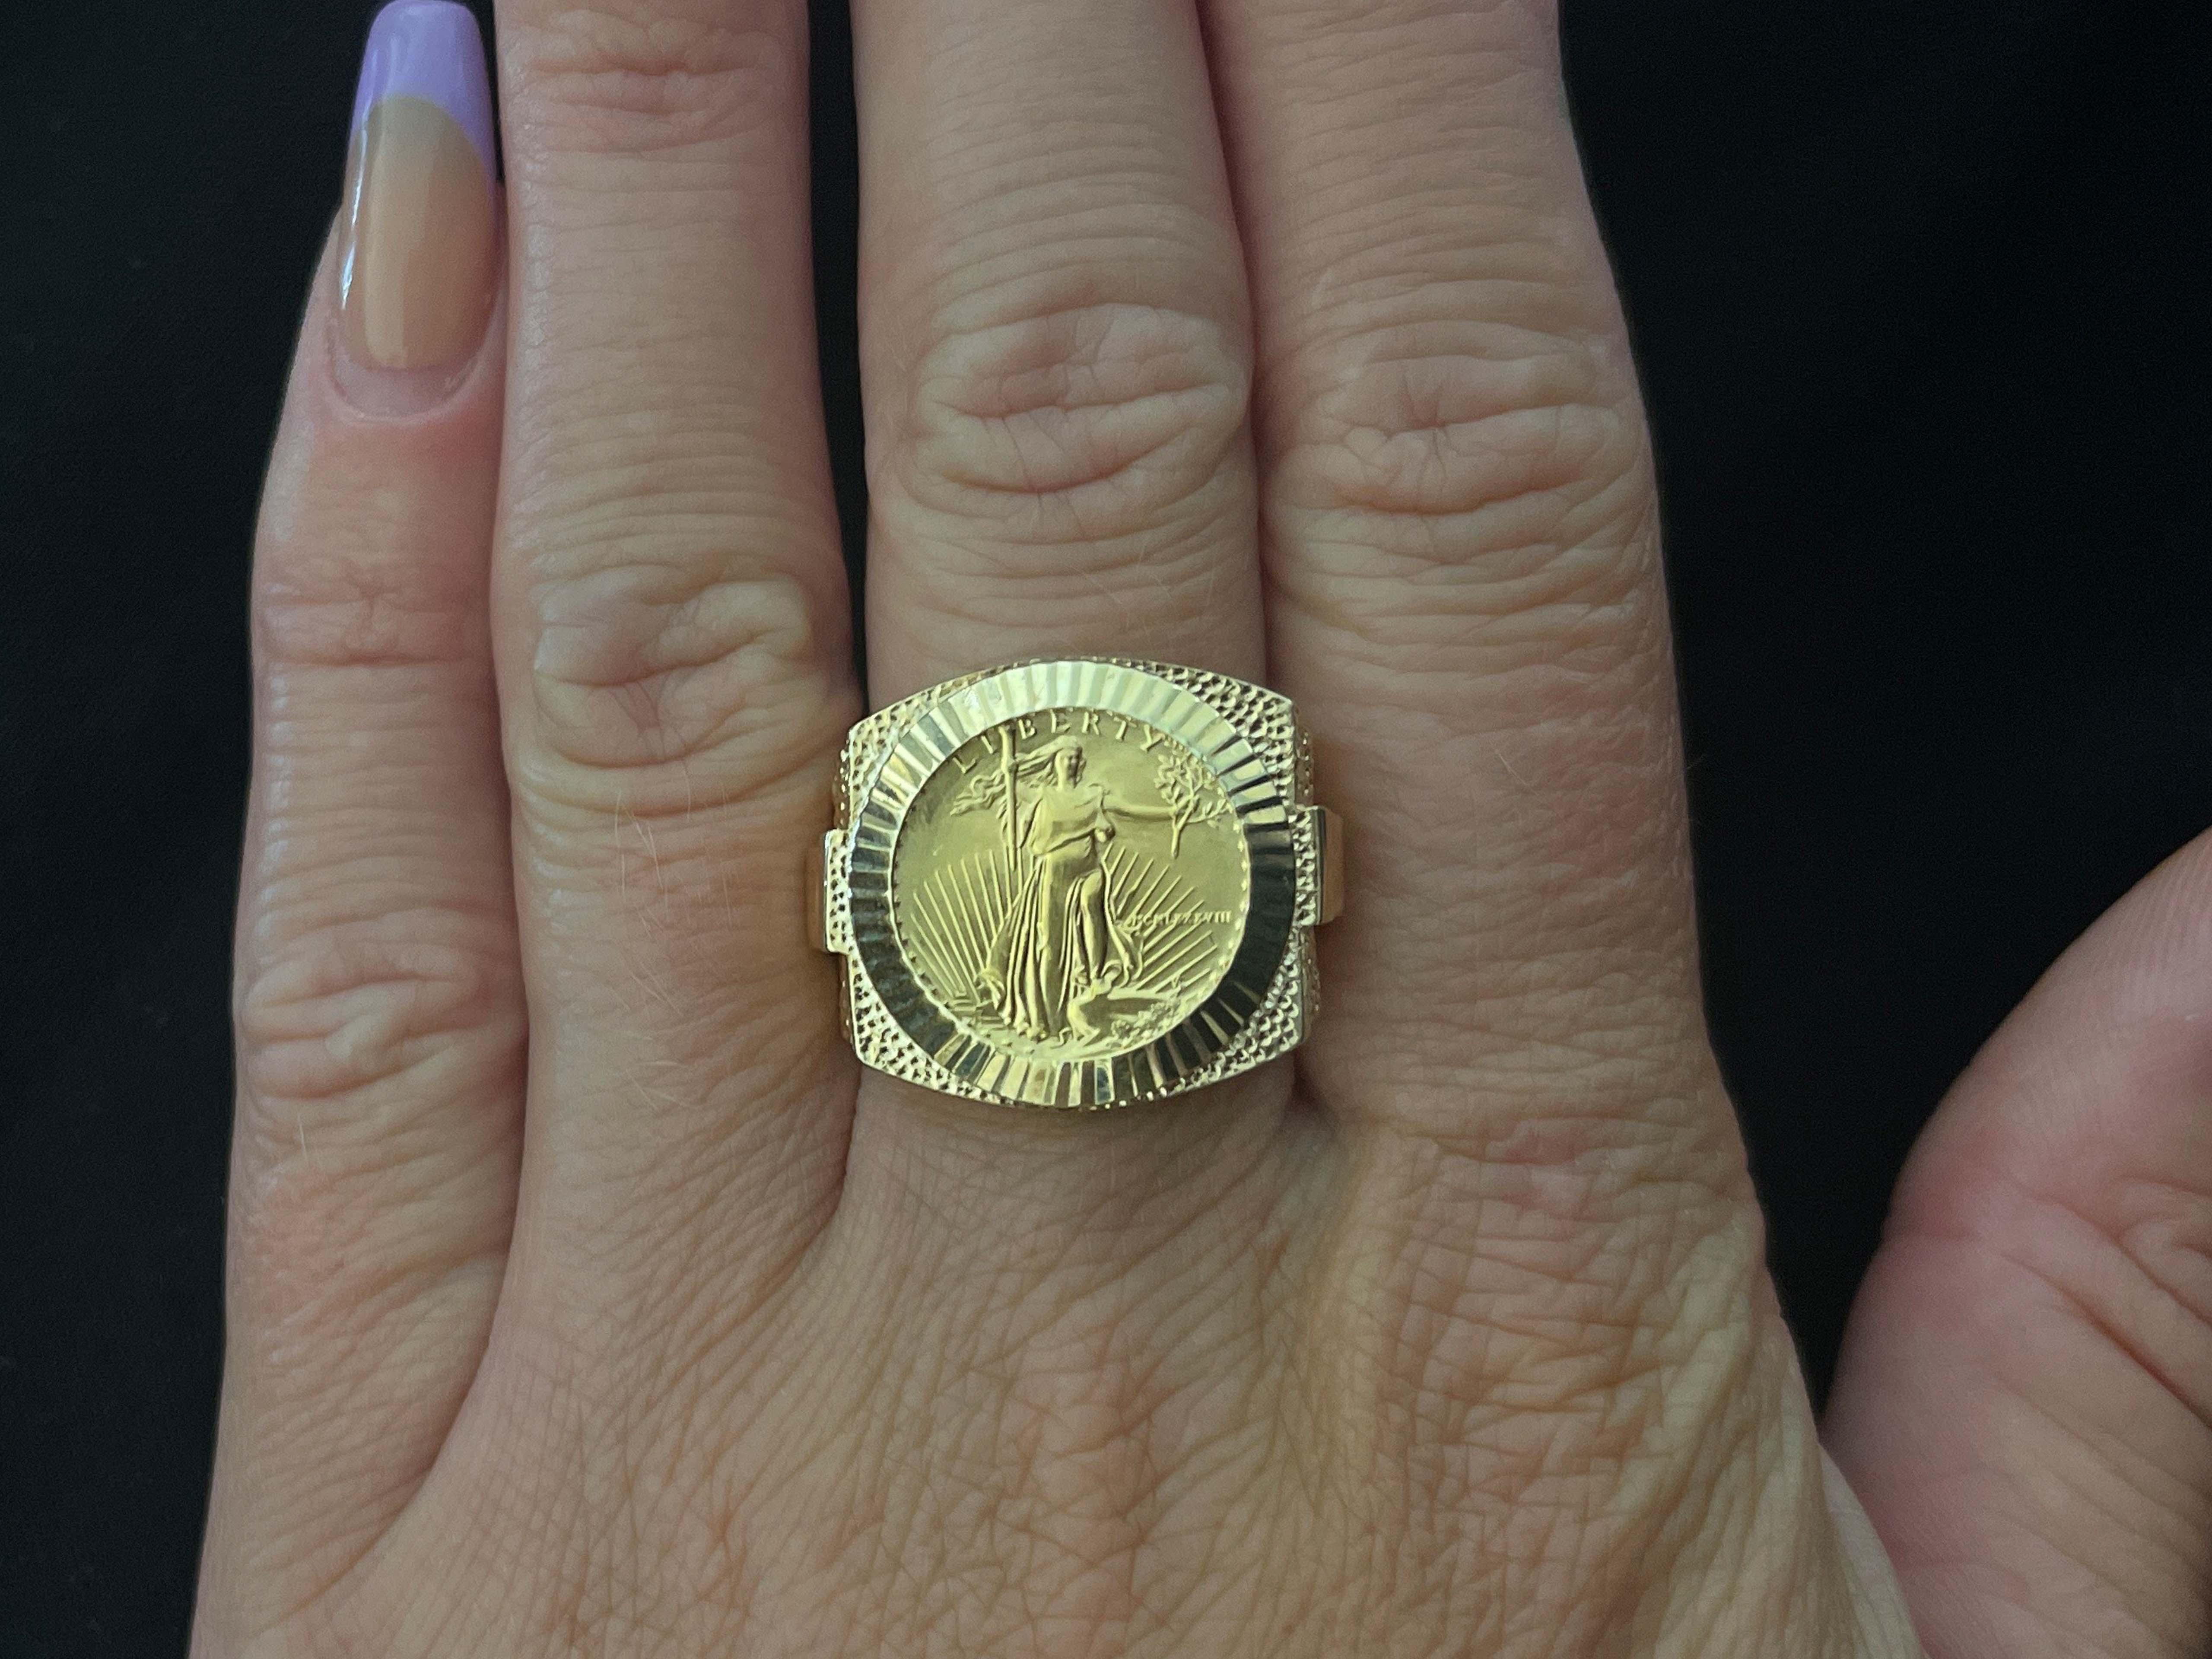 American Eagle Gold Coin Rolex Style Ring in 14k Yellow Gold. The ring contains one $5 American Eagle gold coin 0.10 troy ounce of pure gold. The coin is set in fluted bezel. The ring has a rolex design on the sides with a hammered and high polish